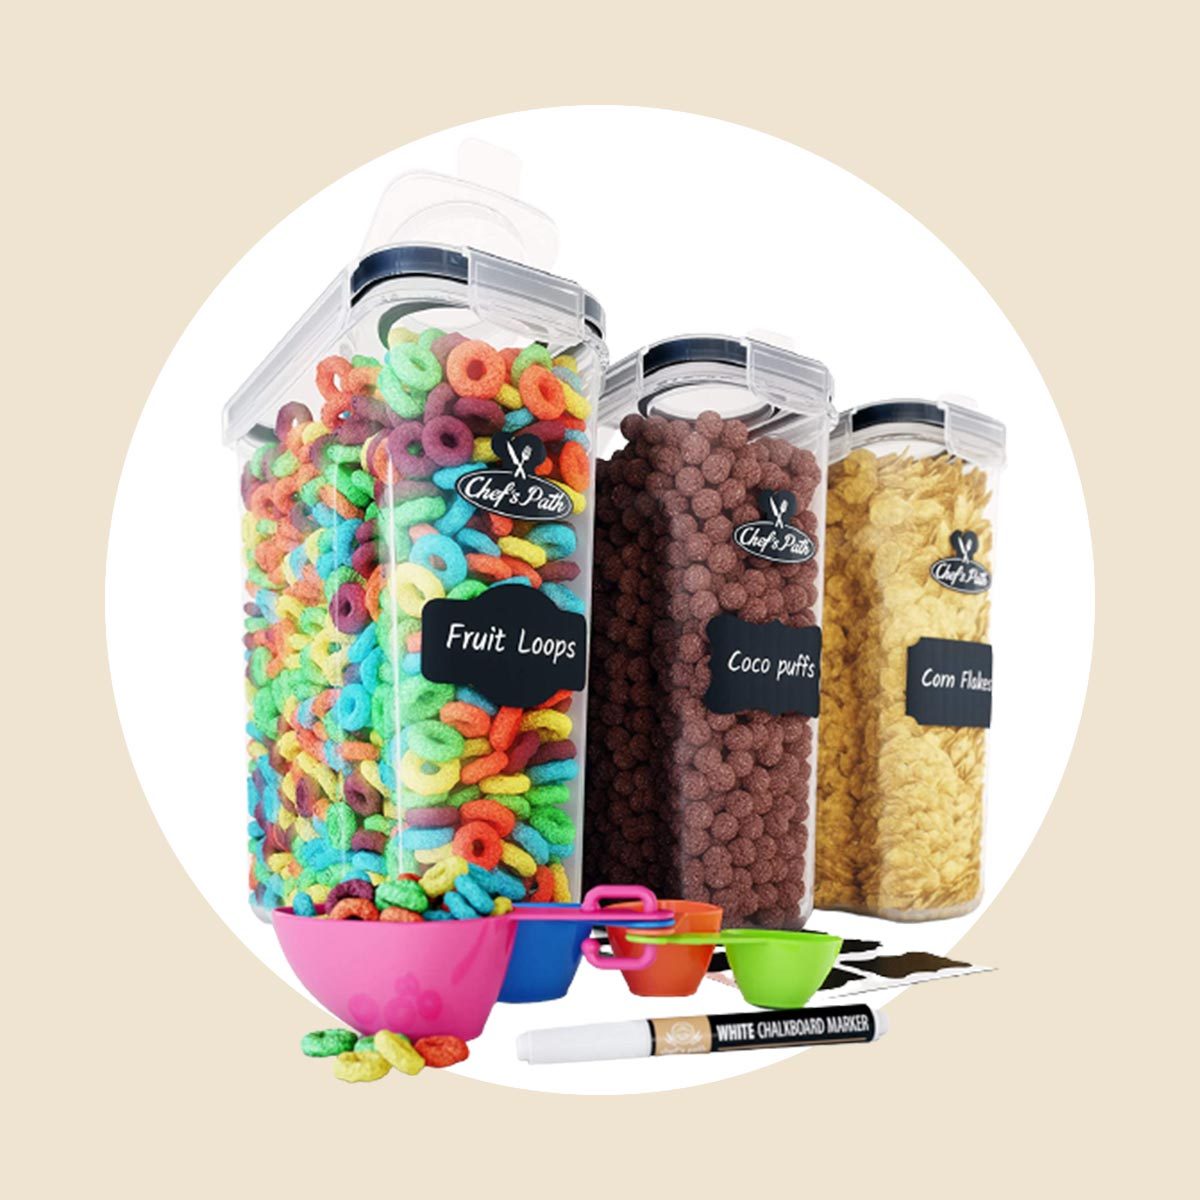 https://www.tasteofhome.com/wp-content/uploads/2021/05/Cereal-Containers_ecomm_via-amazon.com_.jpg?fit=700%2C700